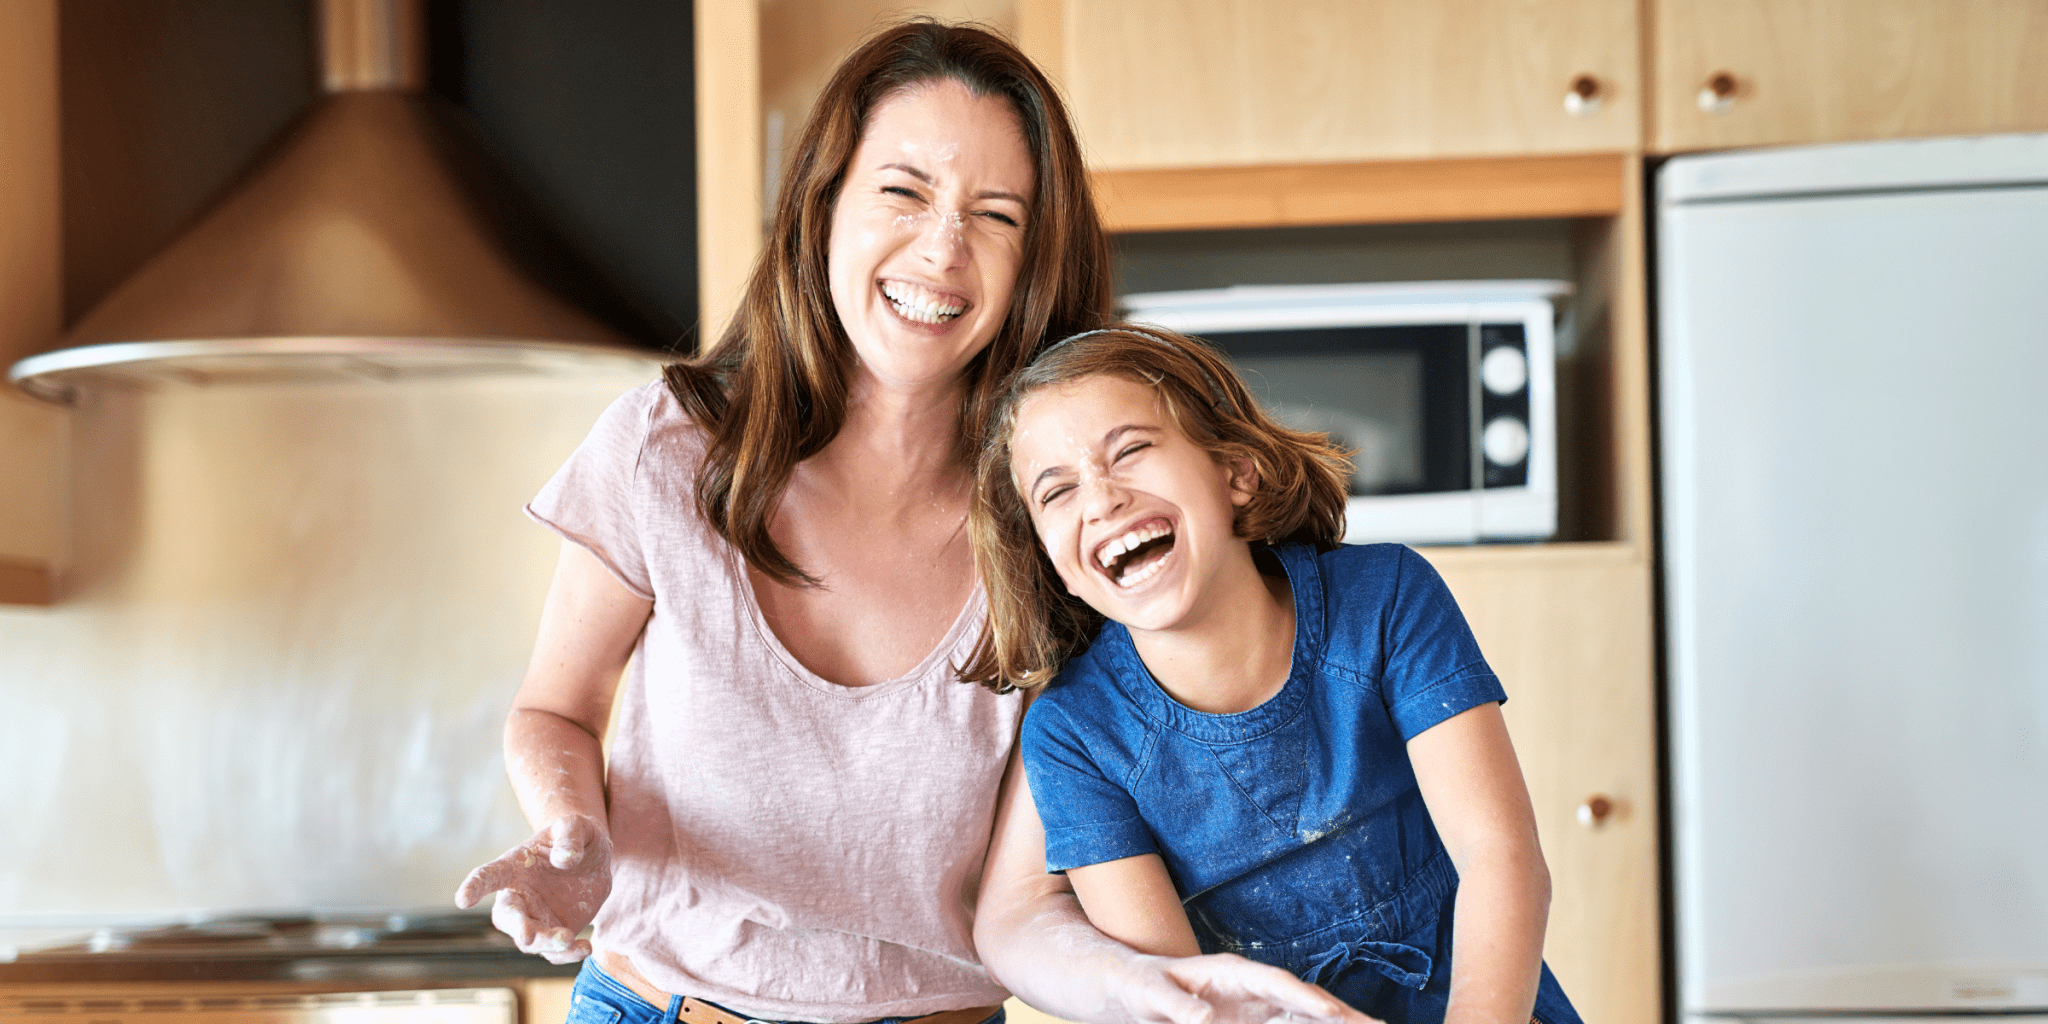 mom laughing with child looking younger managing stress well